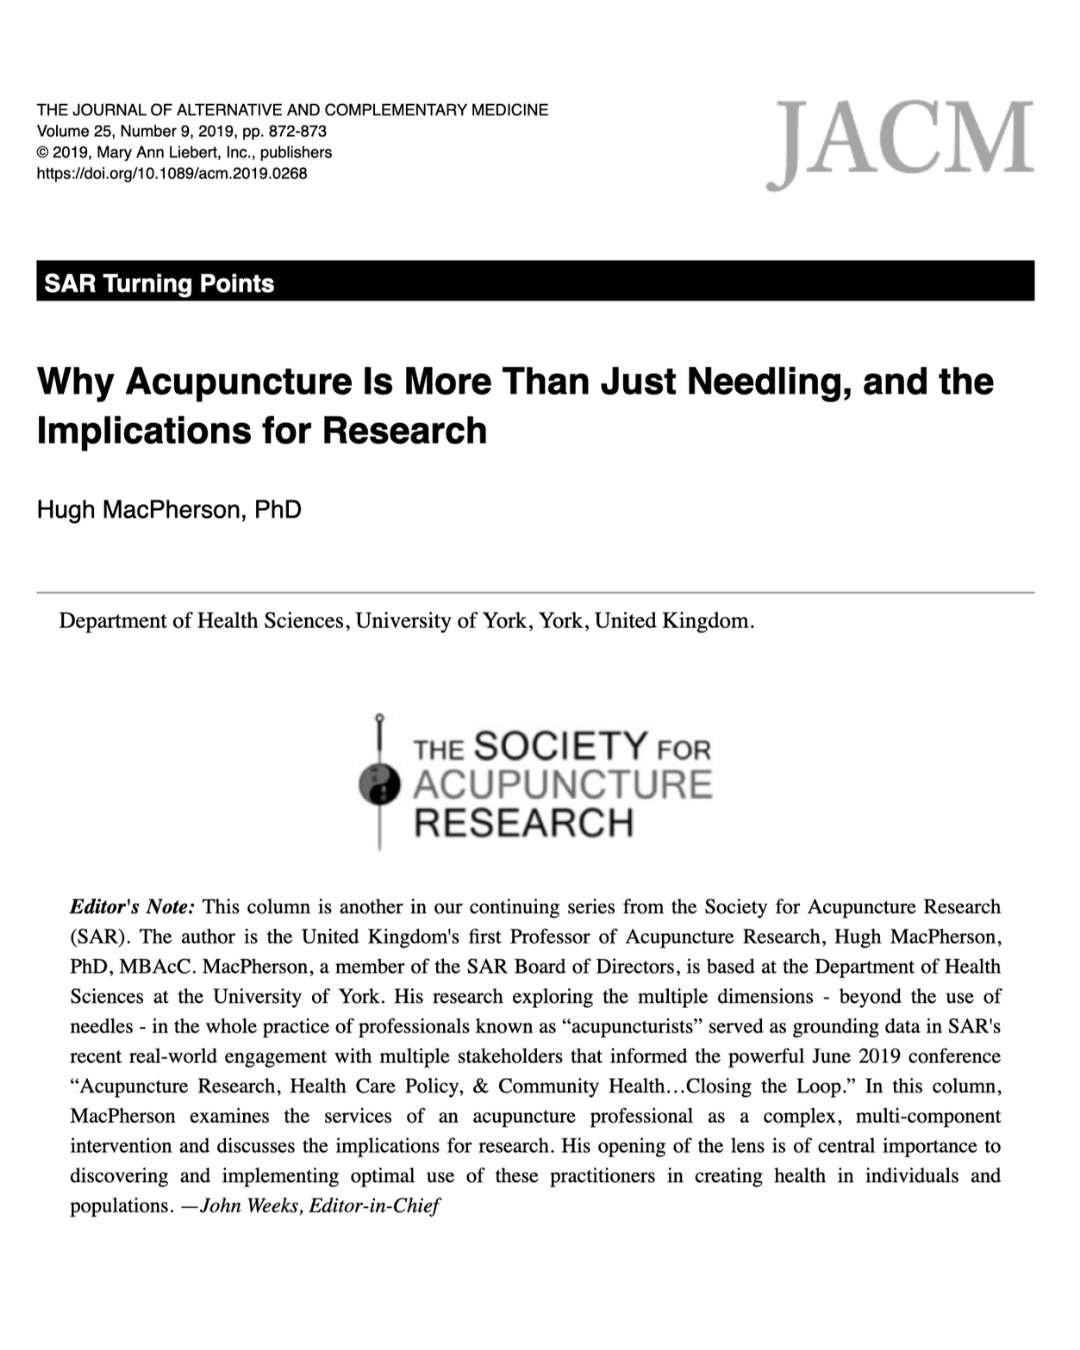 Why Acupuncture Is More Than Just Needling, and the Implications for Research